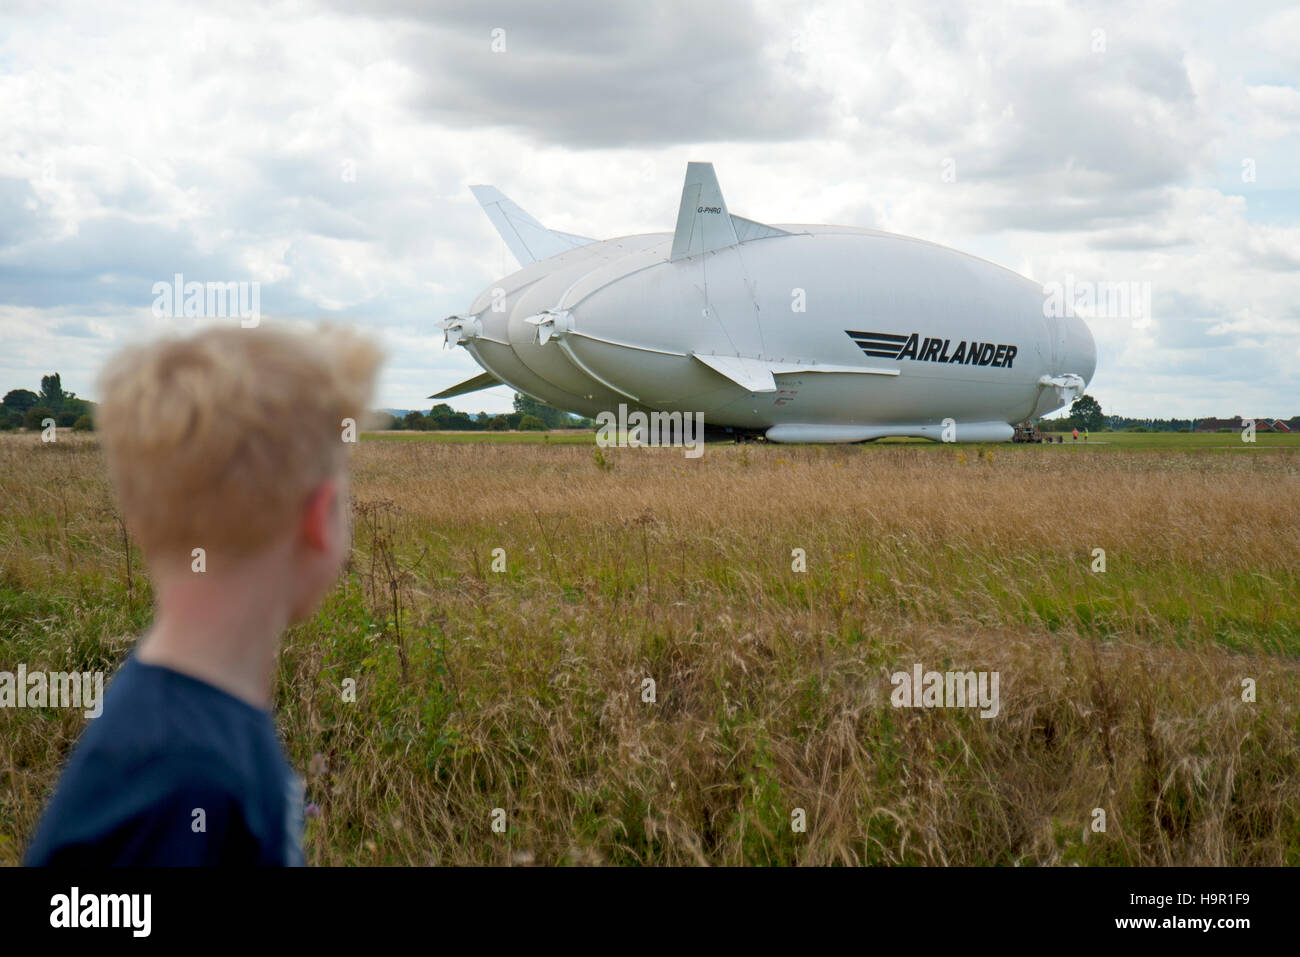 A boy looks on as the worlds largest aircraft, Airlander 10, is prepared for it's maiden flight from Cardington Airfield, Bedfordshire, England, UK Stock Photo